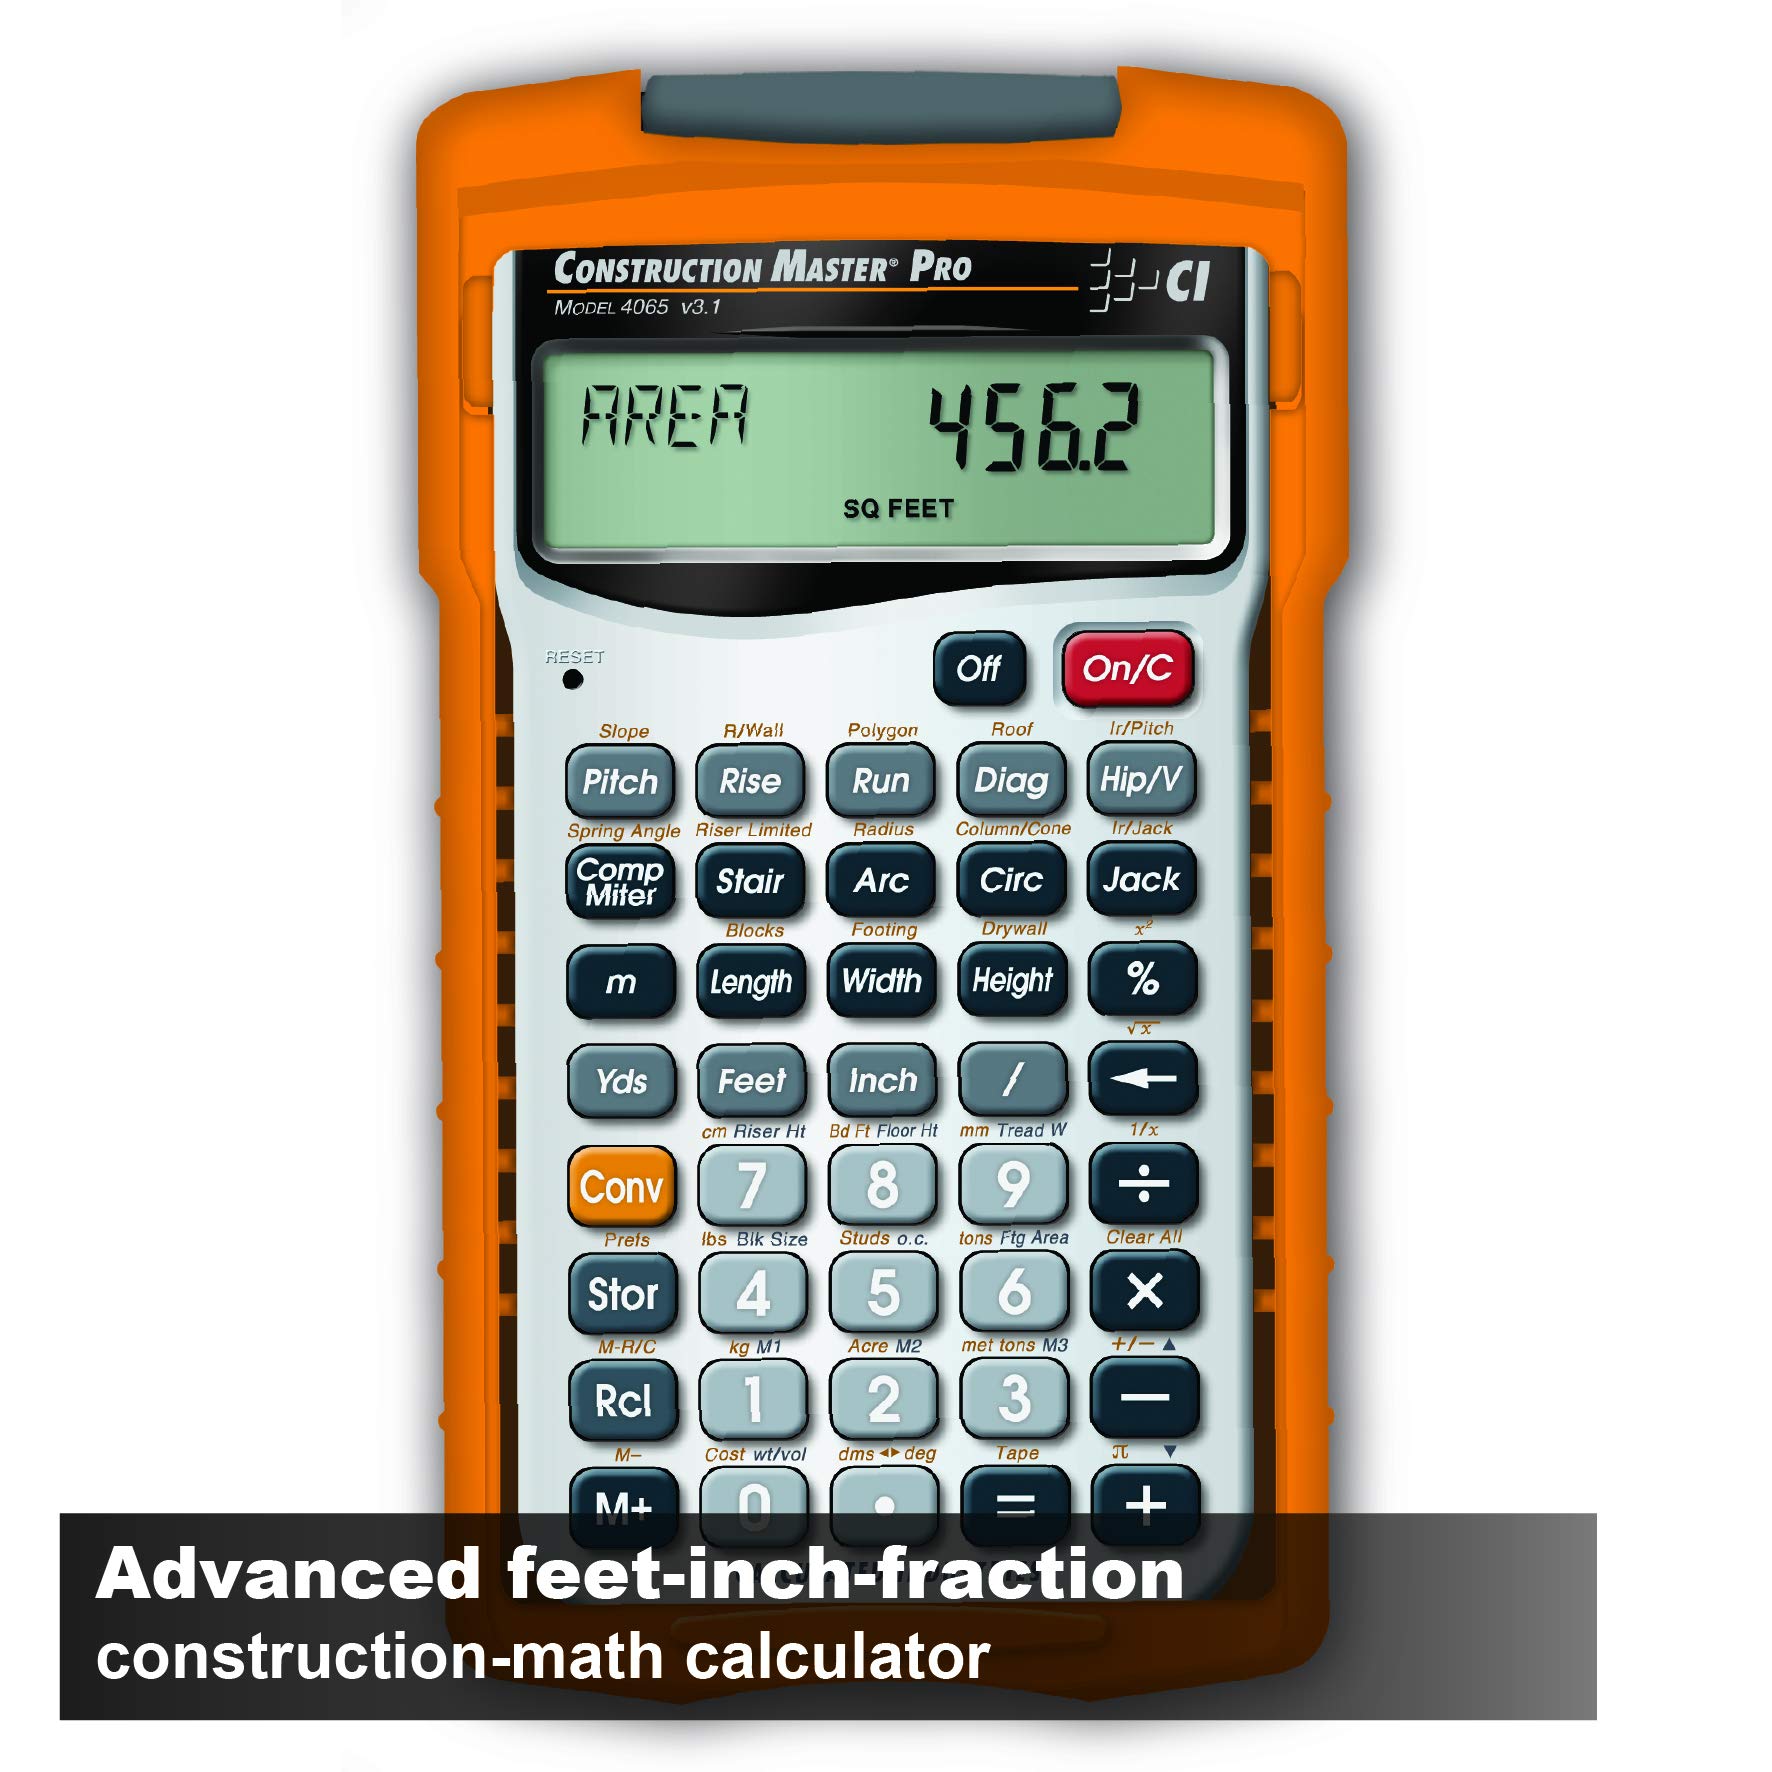 Calculated Industries 6135 Scale Master Pro XE Advanced Digital Plan Measure, White & 4065 Construction Master Pro Advanced Construction Math Feet-inch-Fraction Calculator